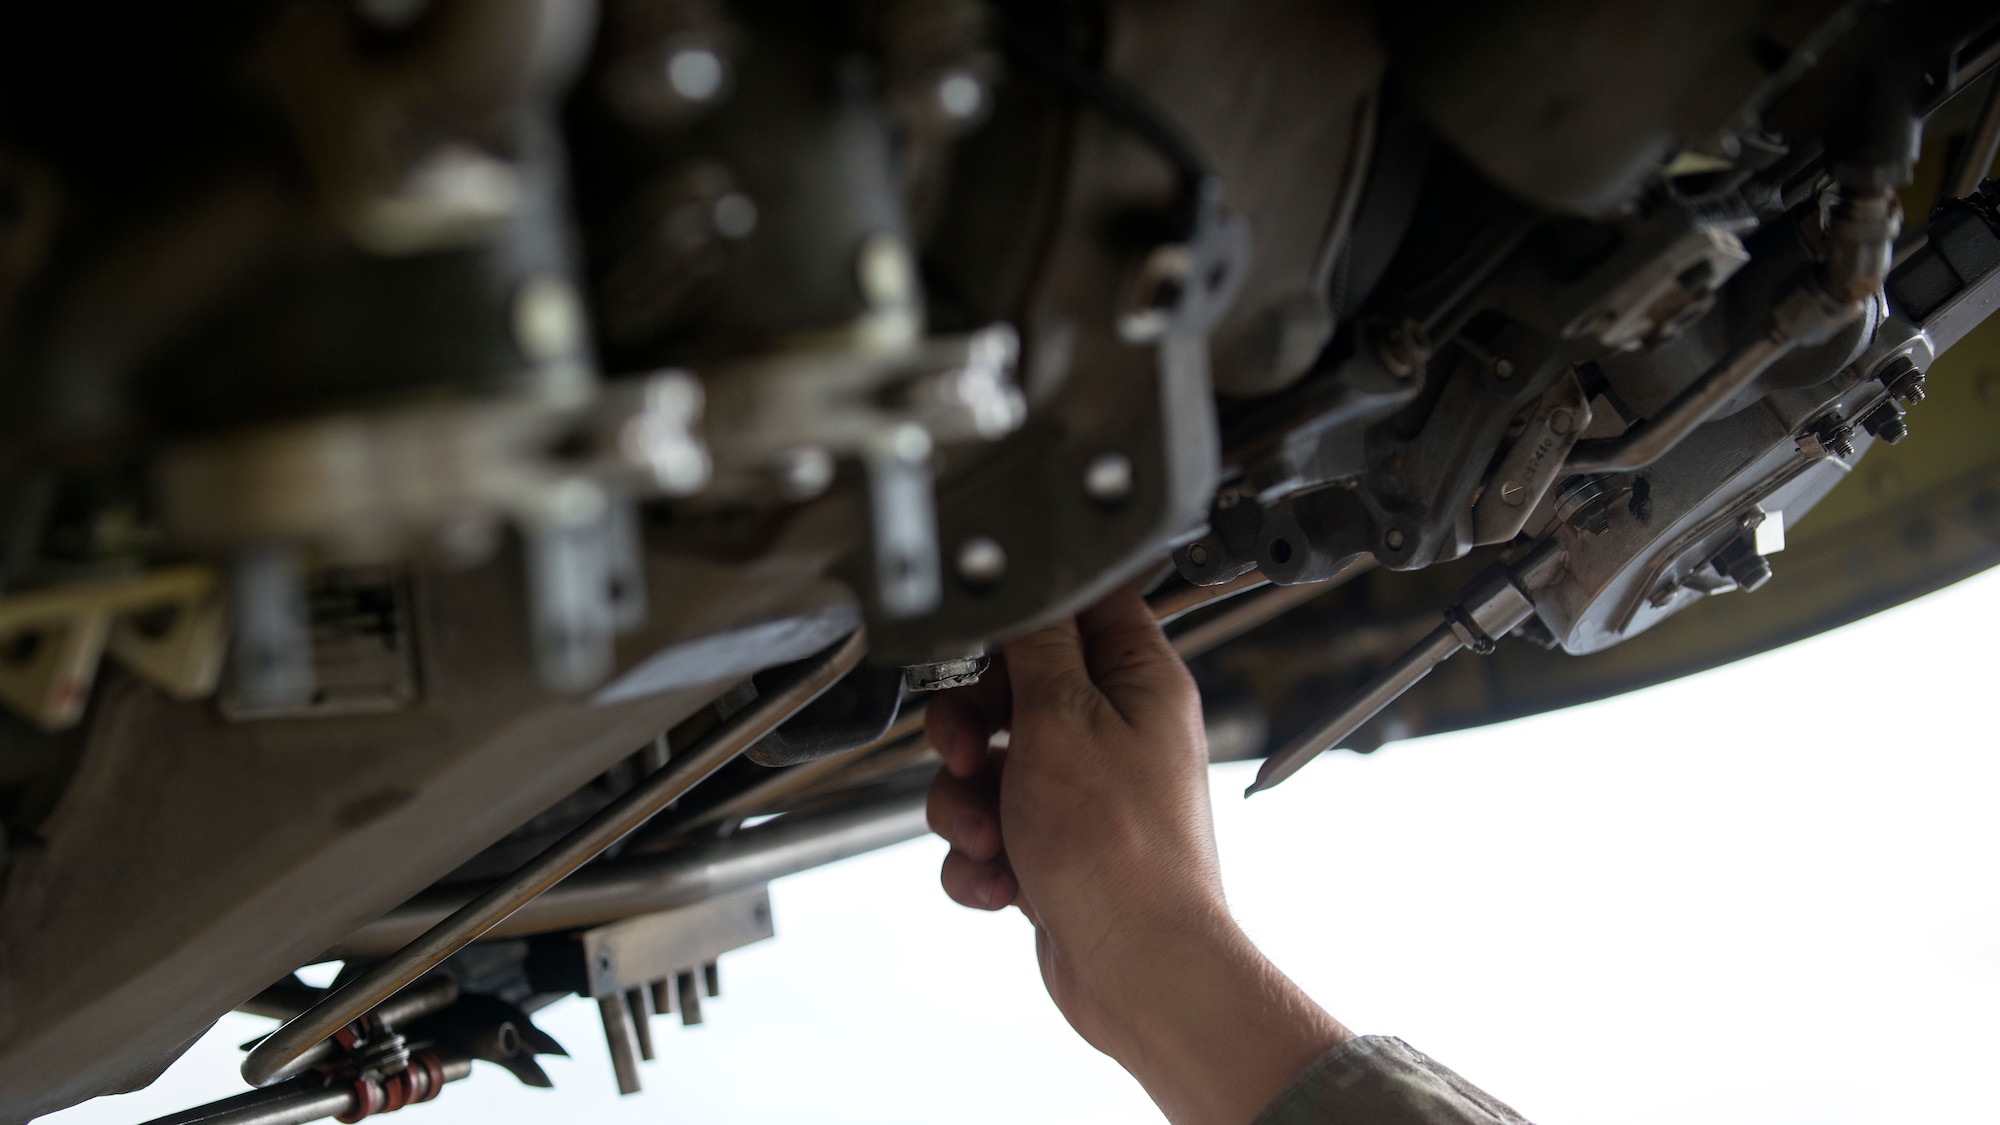 U.S. Air Force Staff Sgt. Joseph Libby, a 6th Aircraft Maintenance Squadron crew chief, inspects a KC-135 Stratotanker aircraft engine at MacDill Air Force Base, Fla., Nov. 19, 2018.